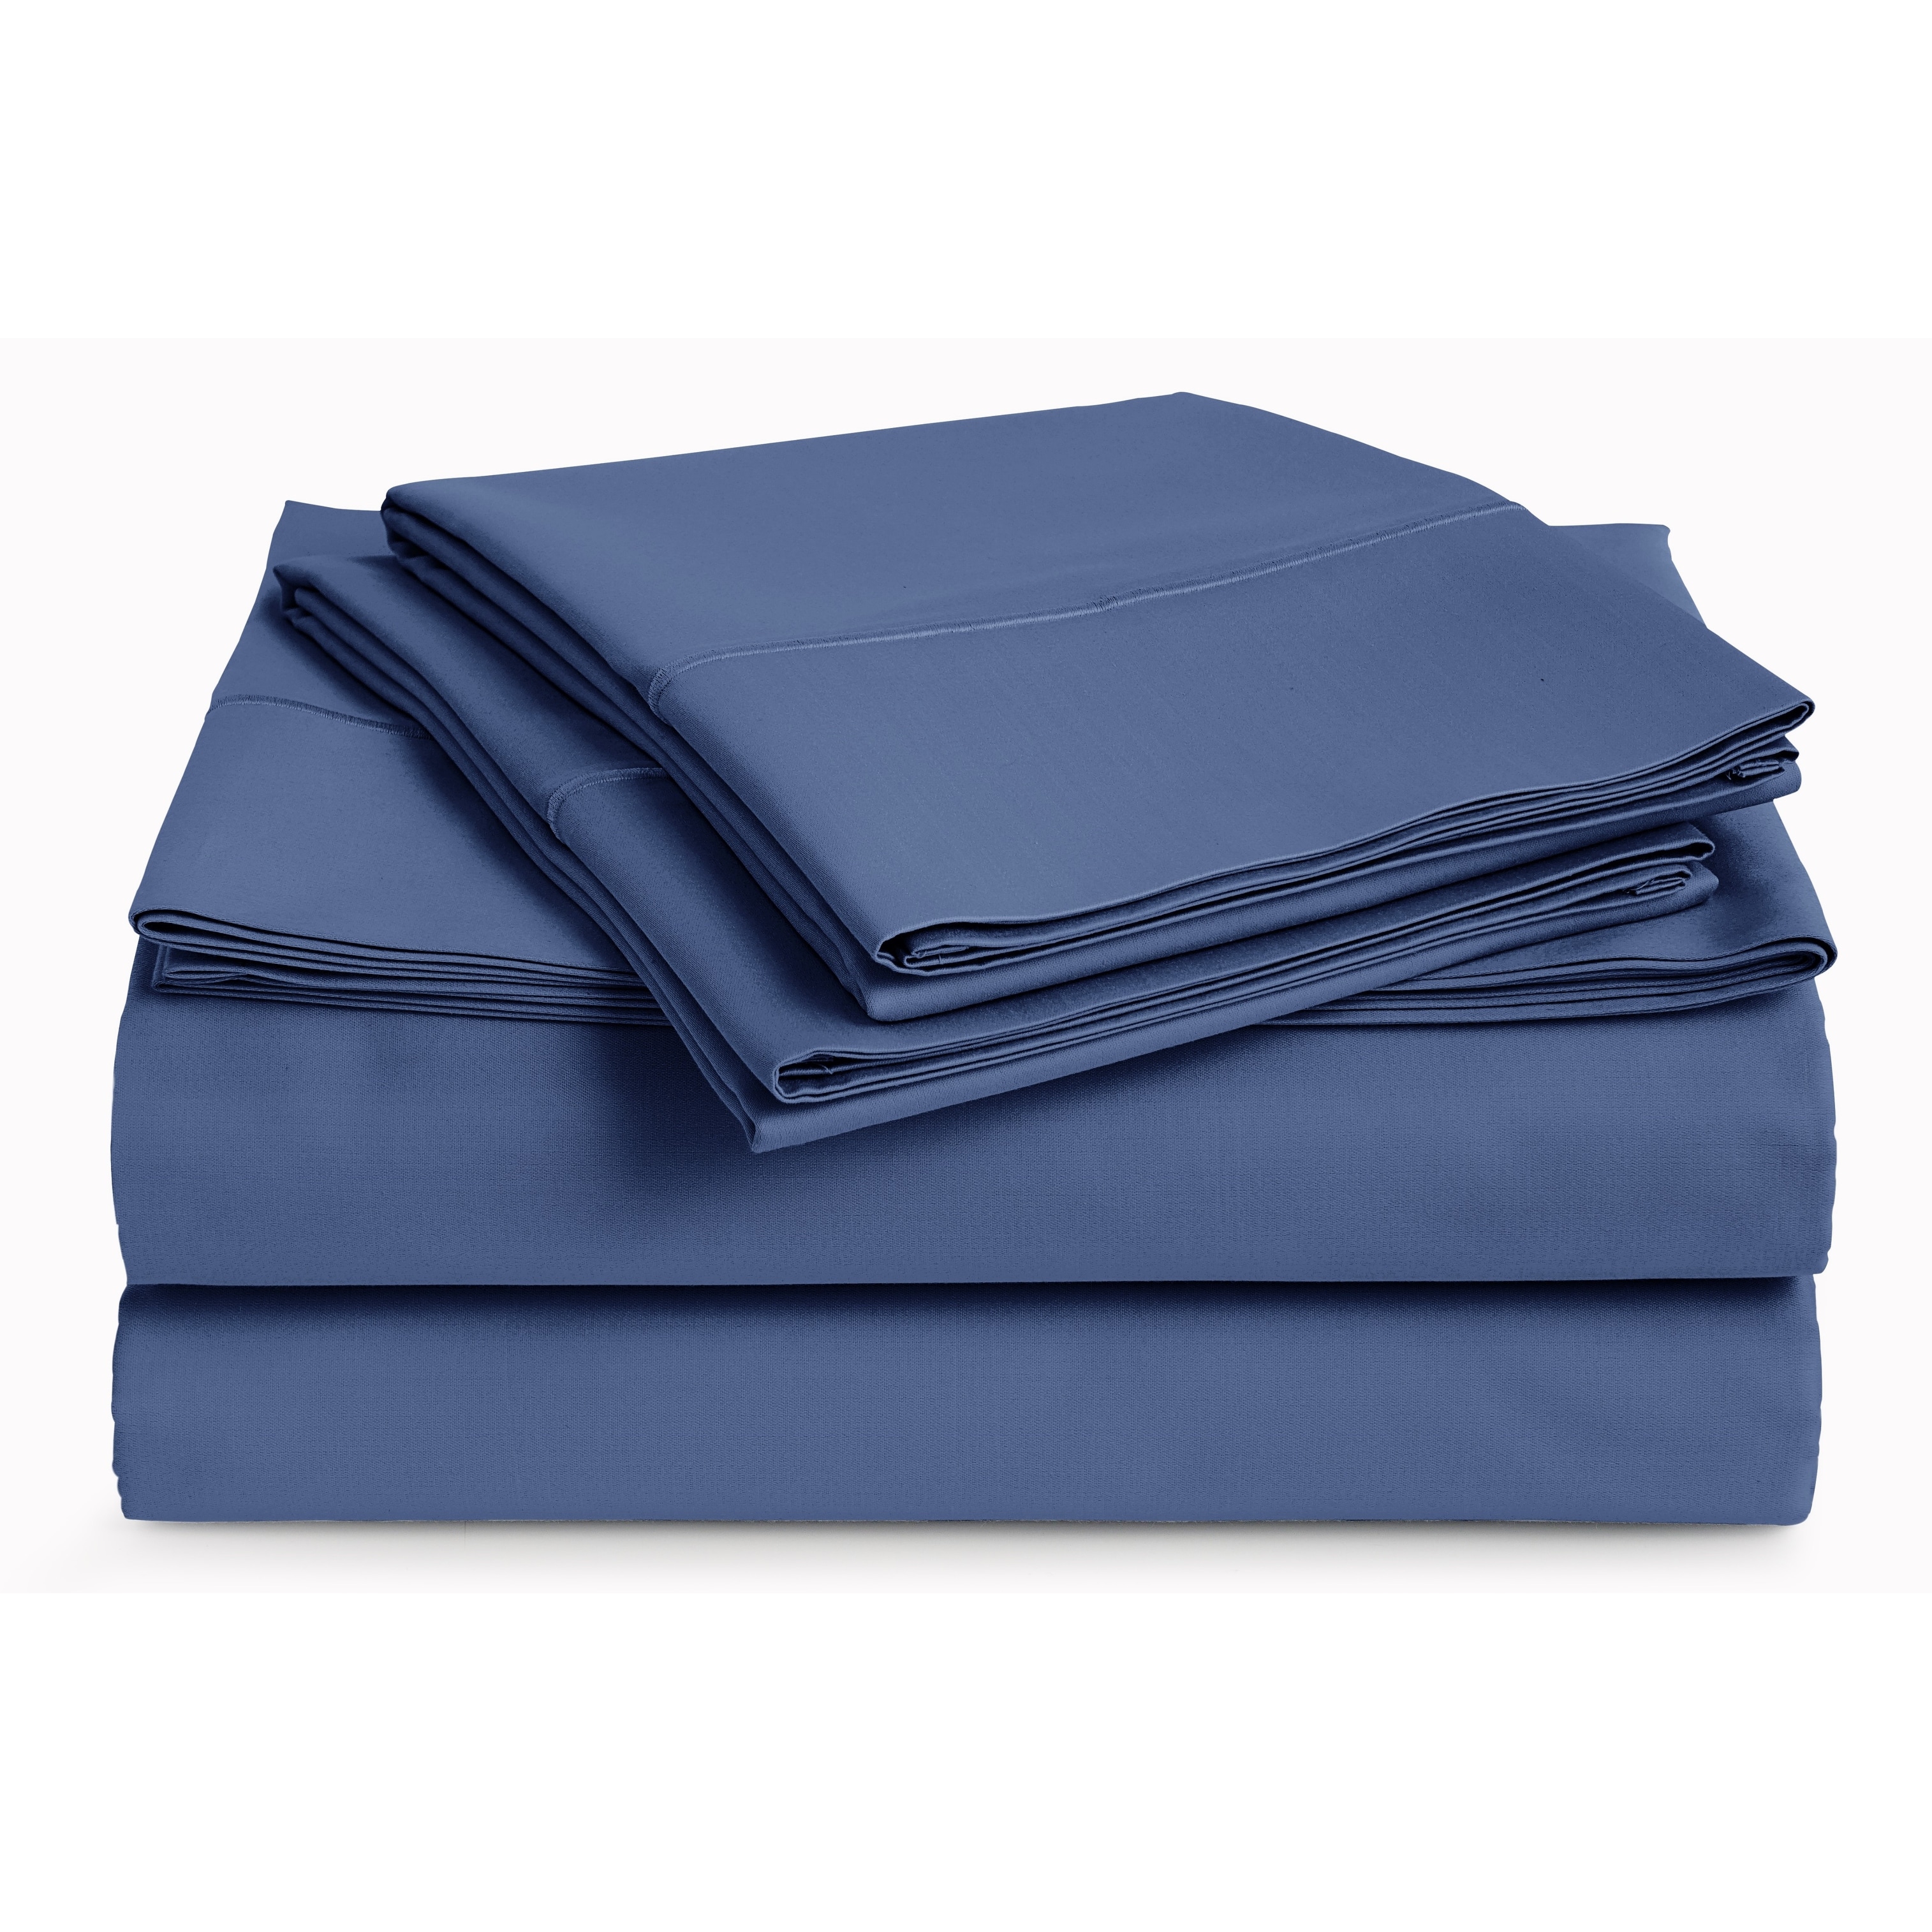 1200 Thread Count Egyptian Cotton Select Bedding Linen AU Sizes Navy Blue Solid